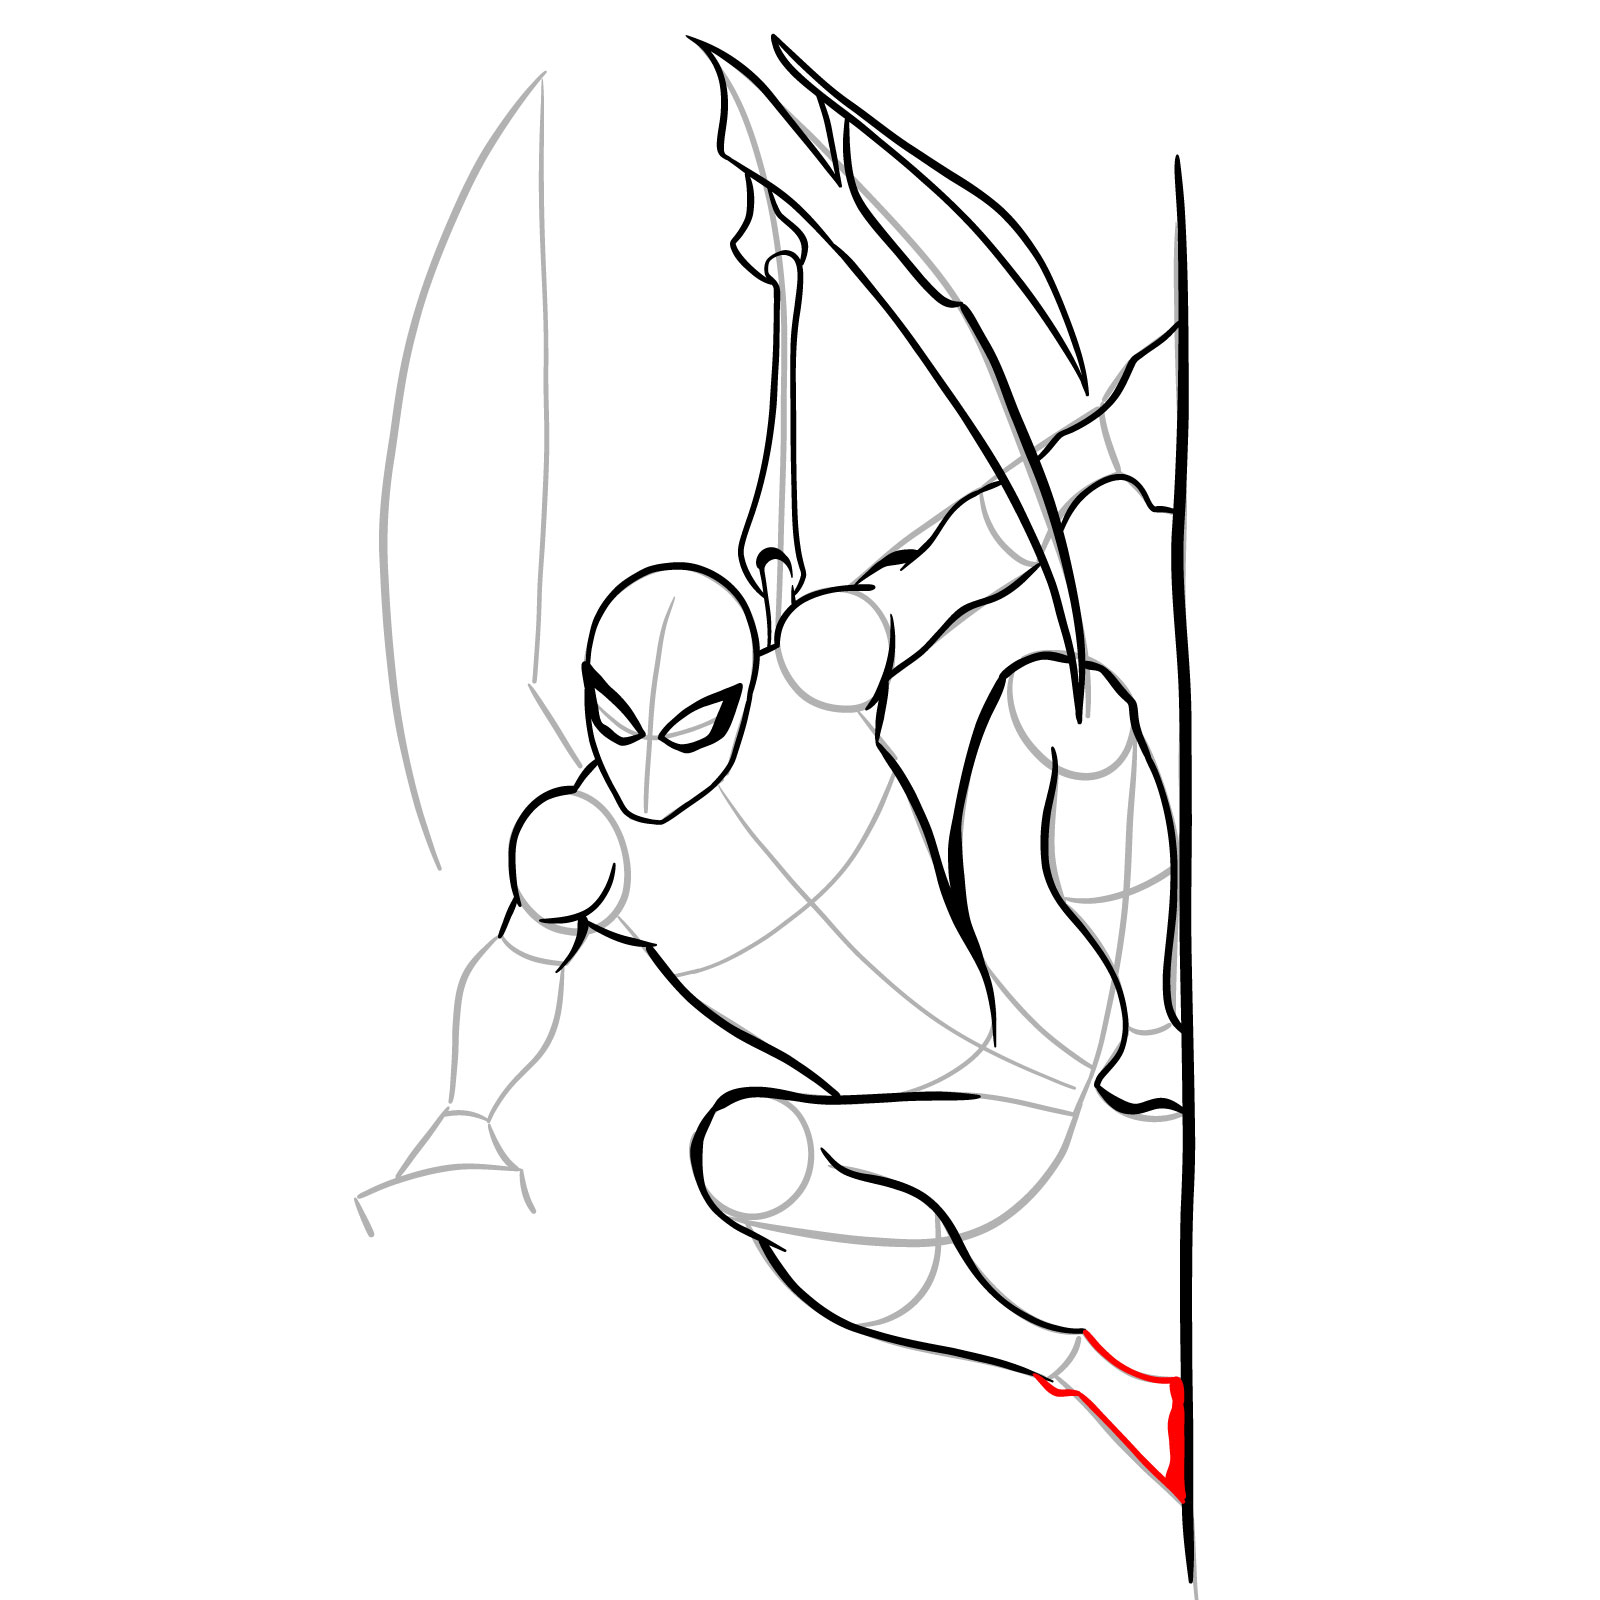 How to draw The Superior Spider-Man - step 21